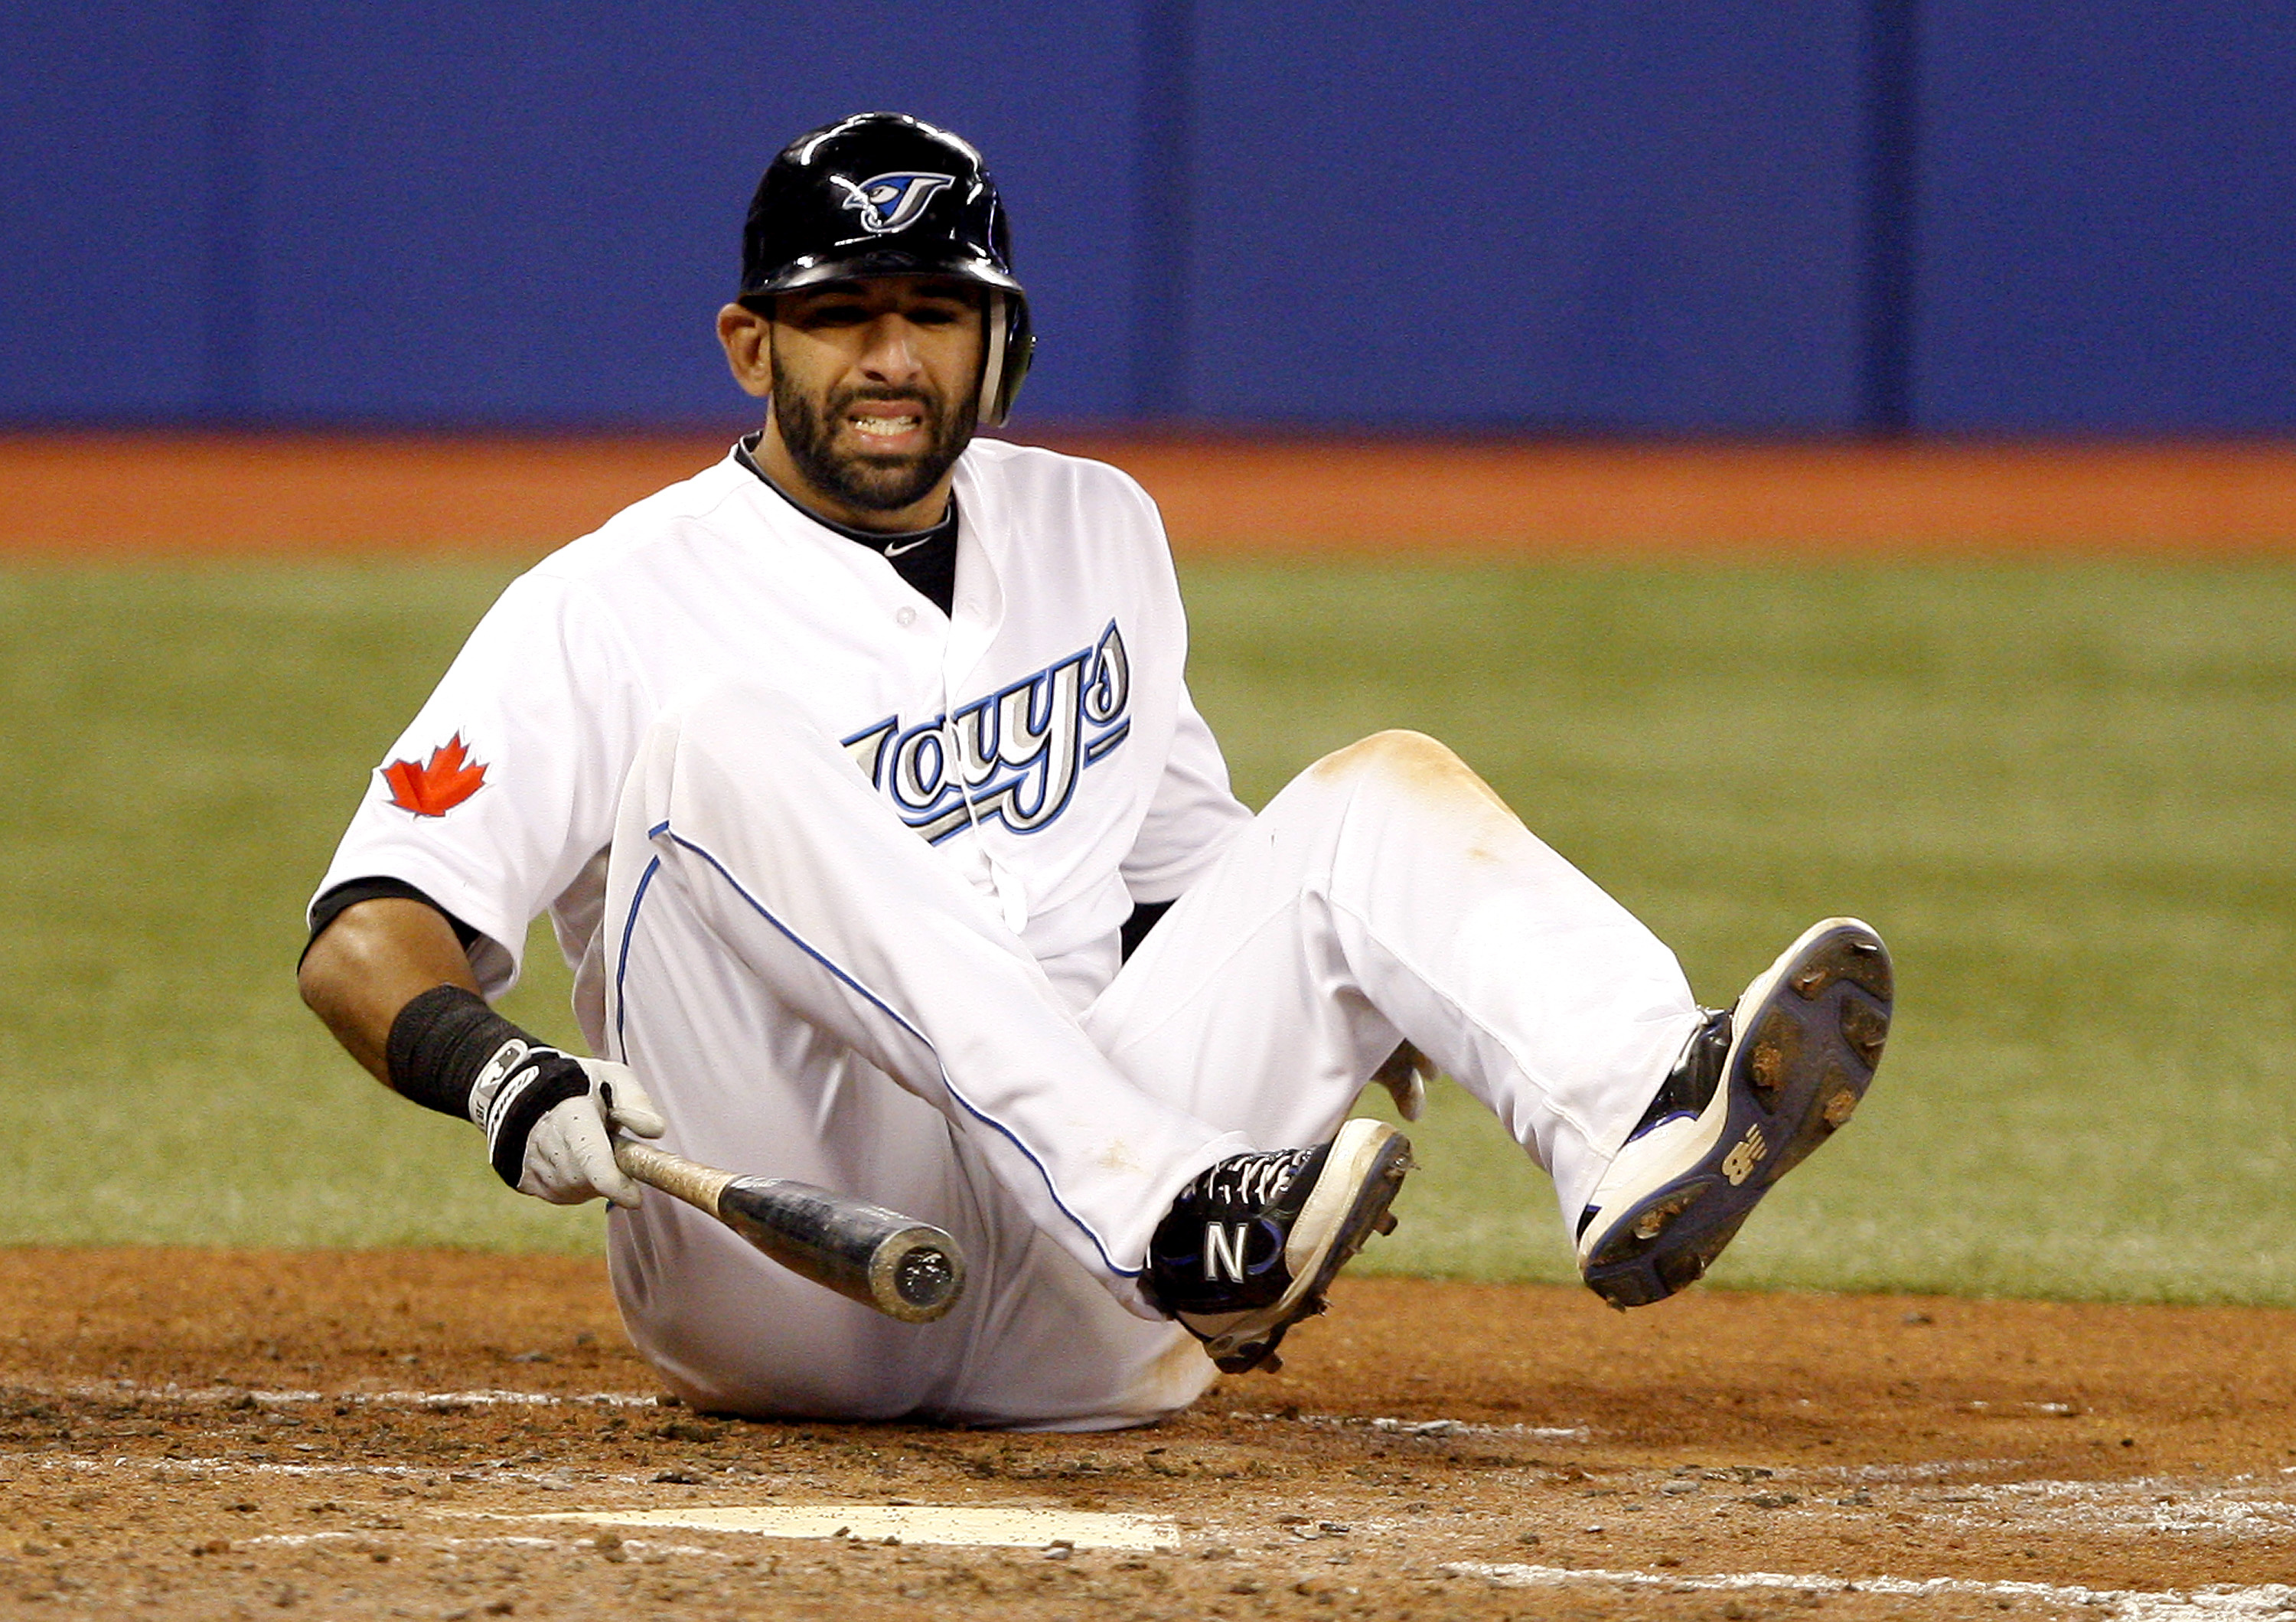 Jose Bautista needs some help in Toronto for the Blue Jays to win more games.